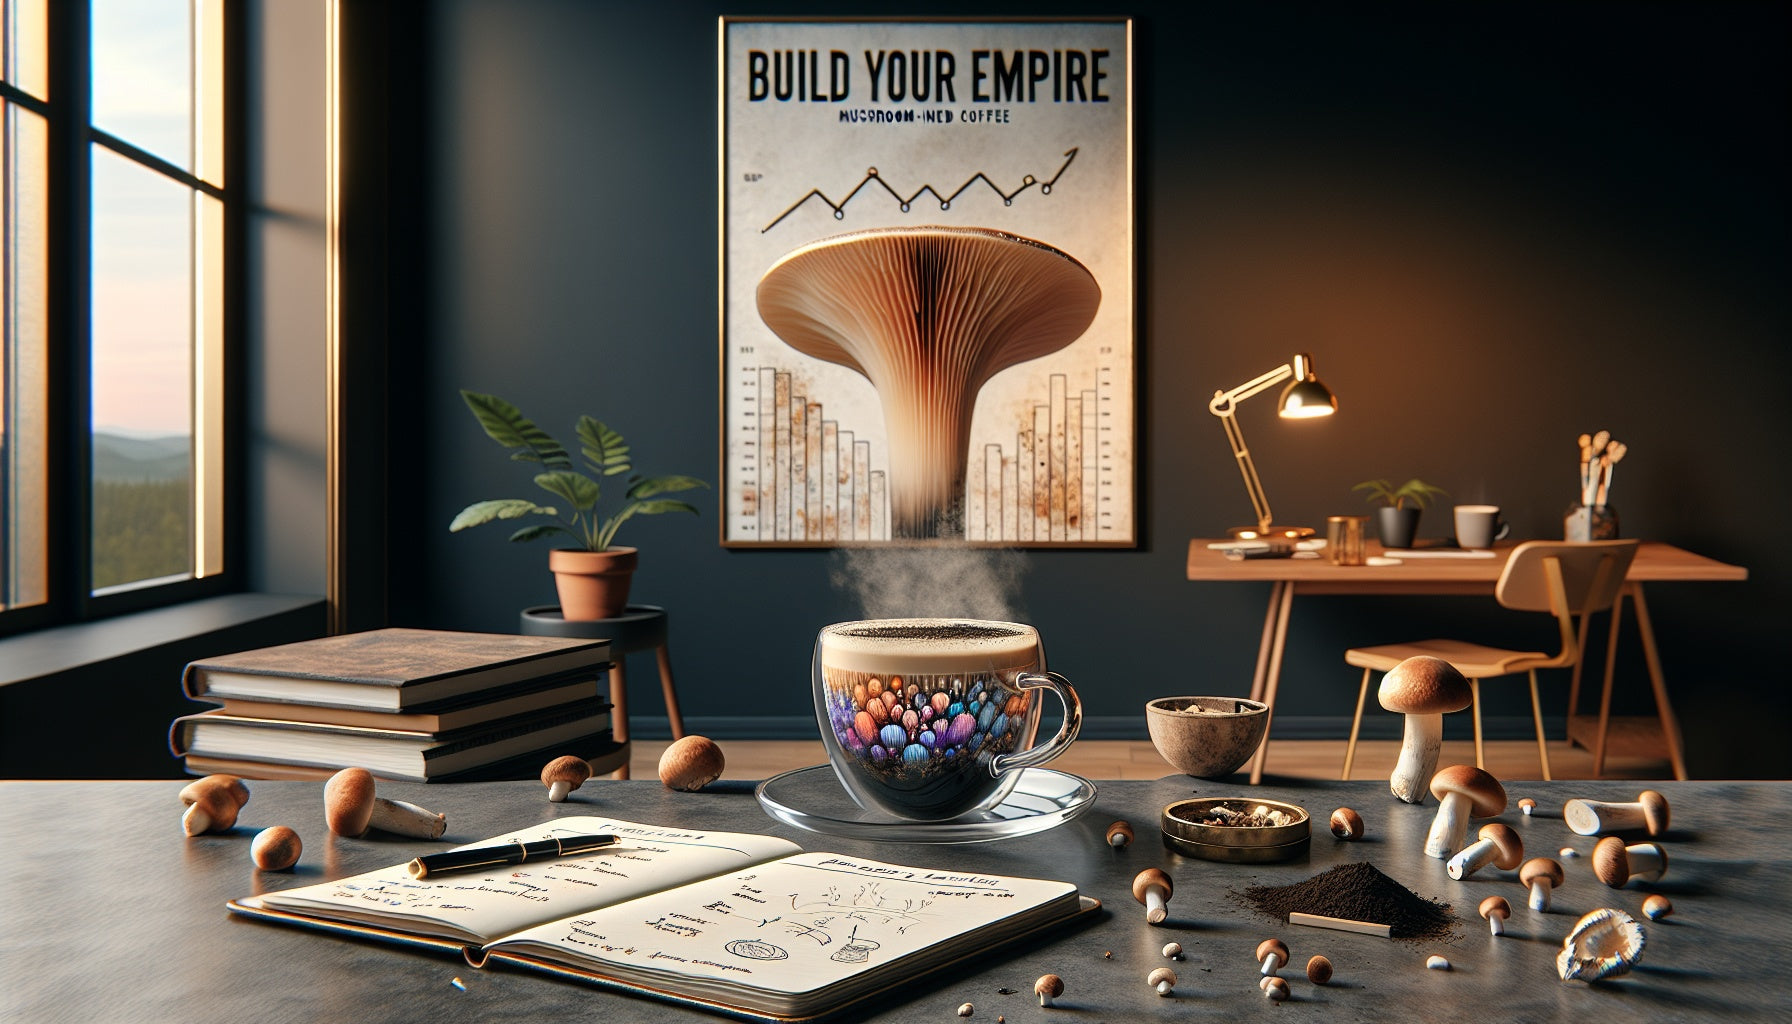 "Guide to building a successful affiliate marketing business with Smoorhs Shroom's mushroom-infused coffee brand, highlighting strategies for digital growth and sustainability."